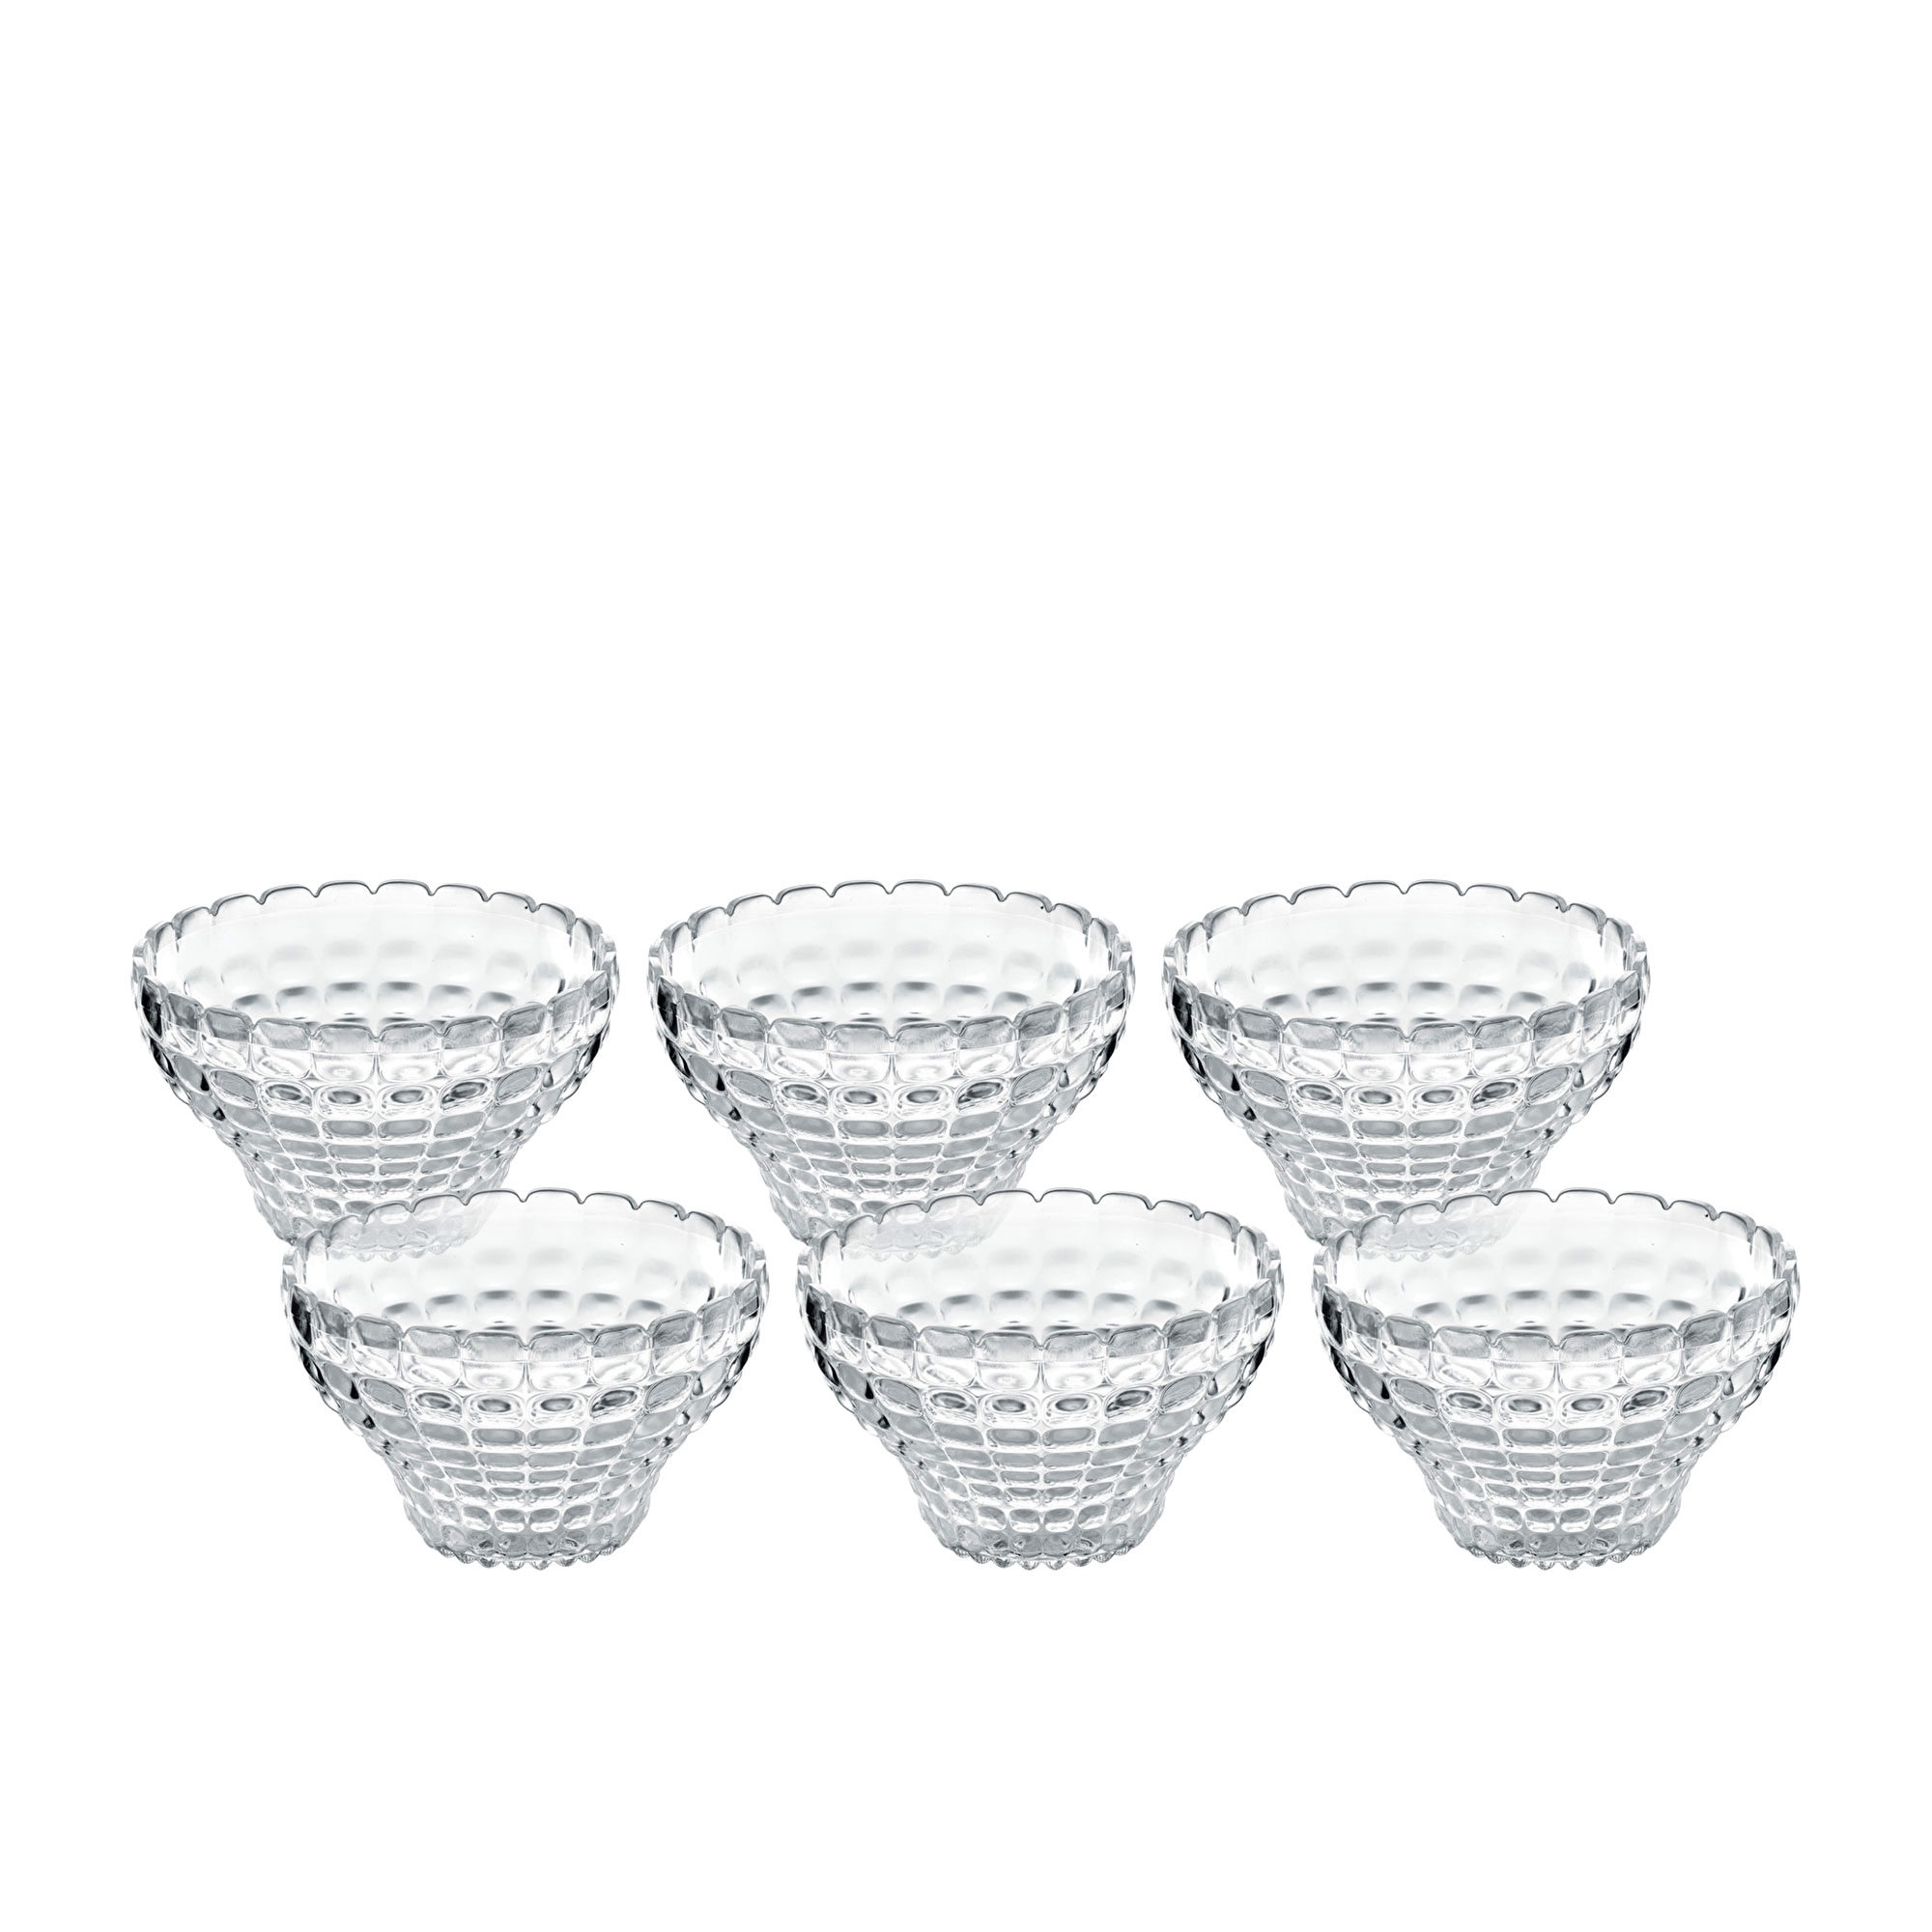 Guzzini Tiffany Serving Cup Set of 6 Clear Image 1